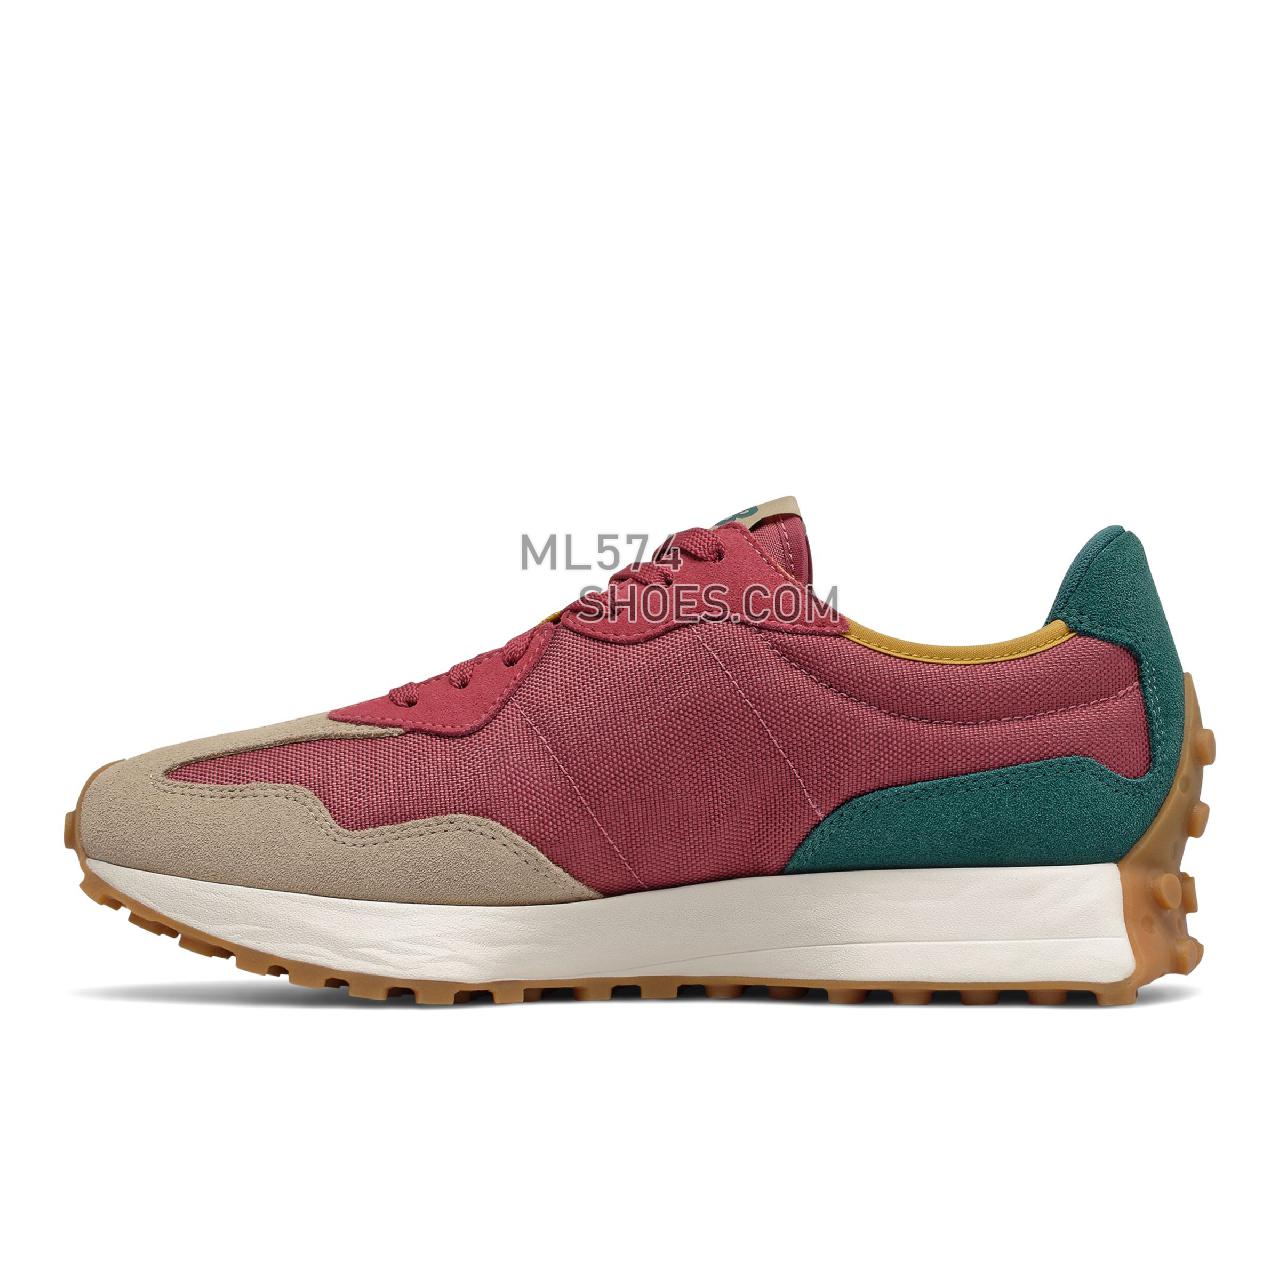 New Balance 327 - Unisex Men's Women's Sport Style Sneakers - Earth Red with Mountain Teal - MS327WT1